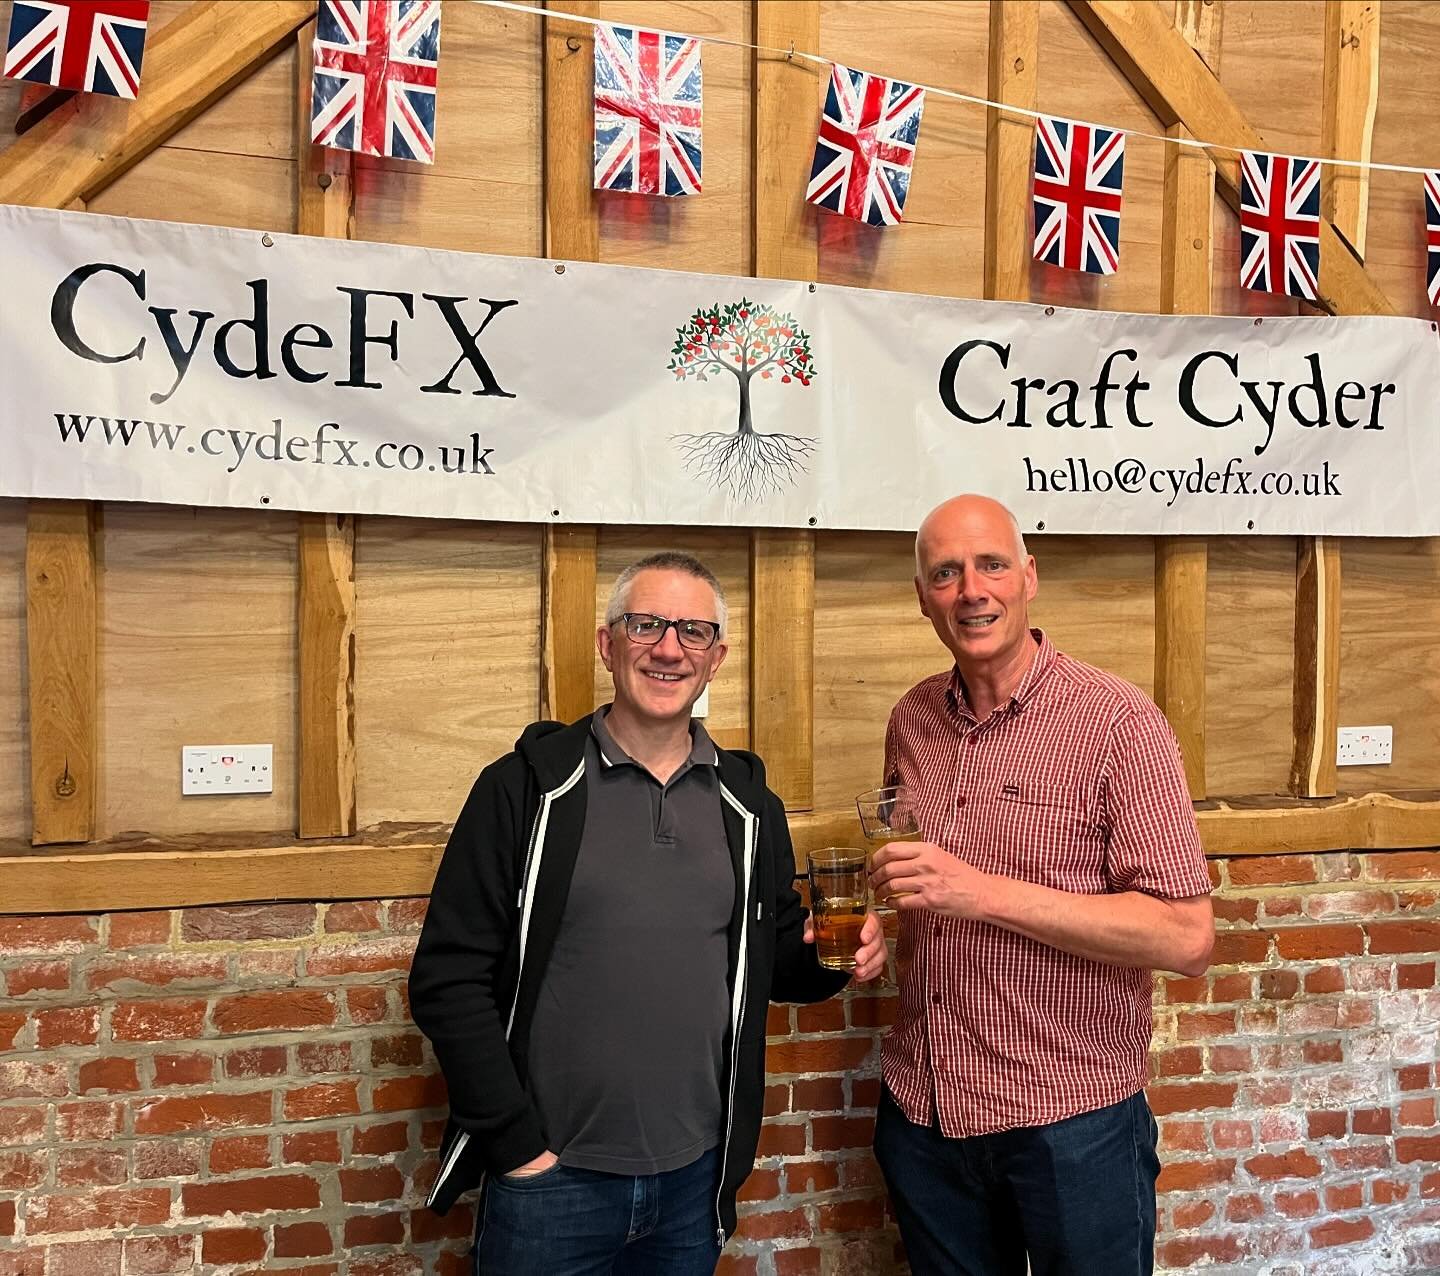 Here we are, Andy and Carl, the Cydefx Cyder Makers at the Sproughton Beer Festival, featuring our very own &ldquo;Festival Cyder&rdquo;. They also do a great range of local beers and lovely grub. Open tomorrow (Sunday 12/05) from 12 to 10. Don&rsquo